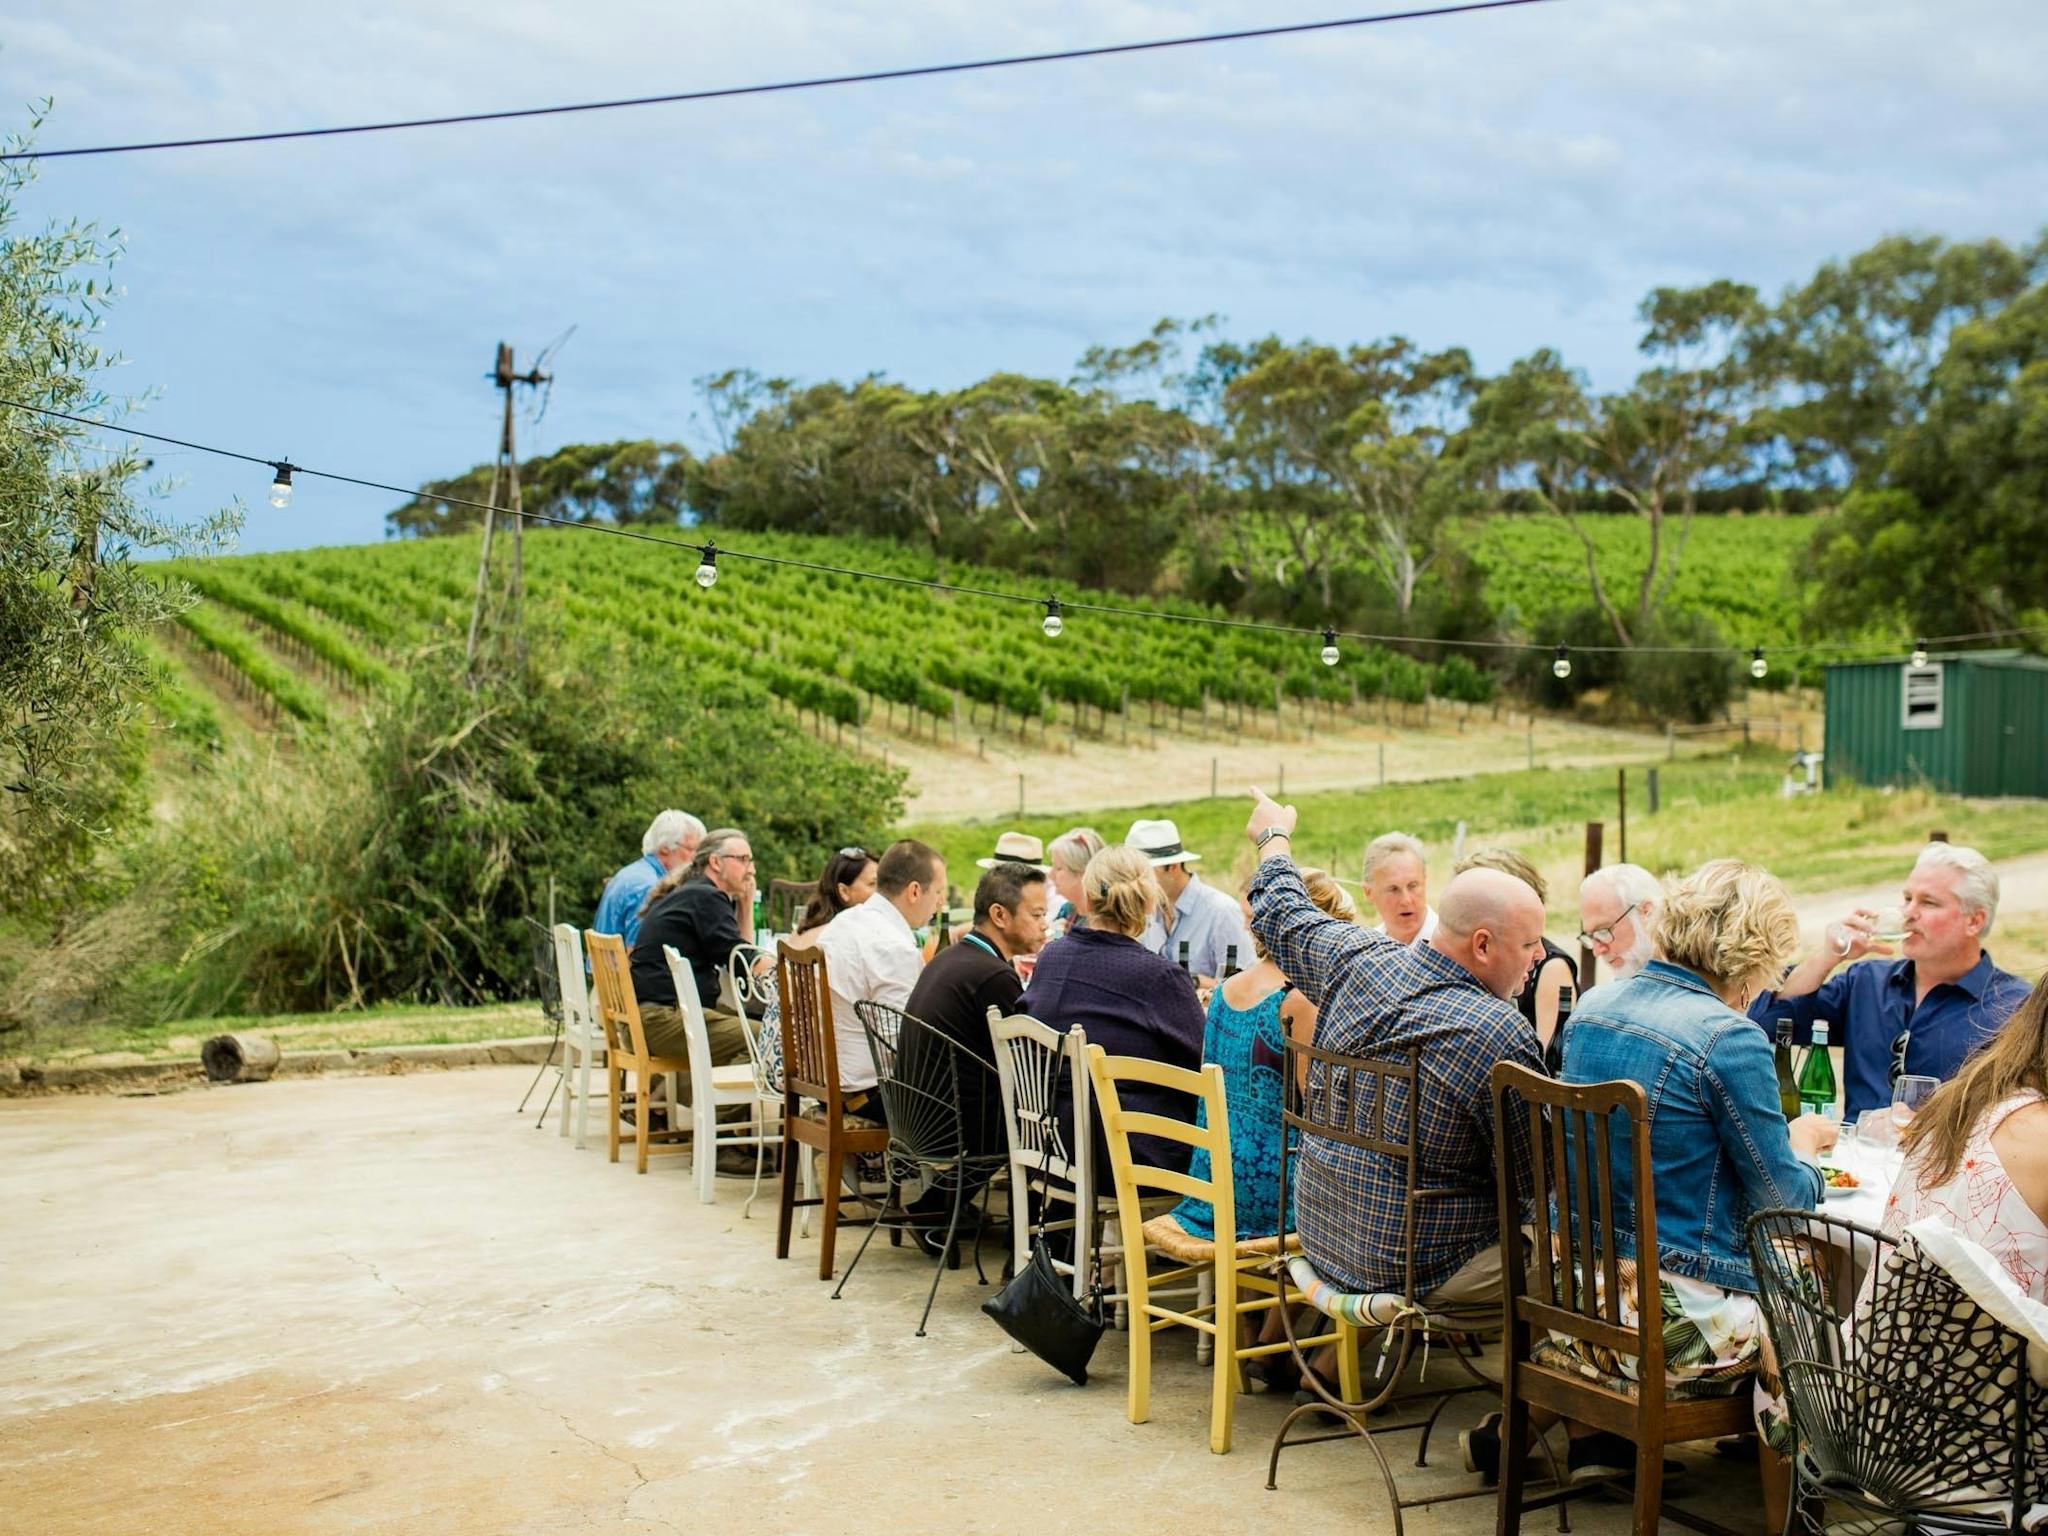 A long outdoor dinning table filled with people and a lush vineyard in the background